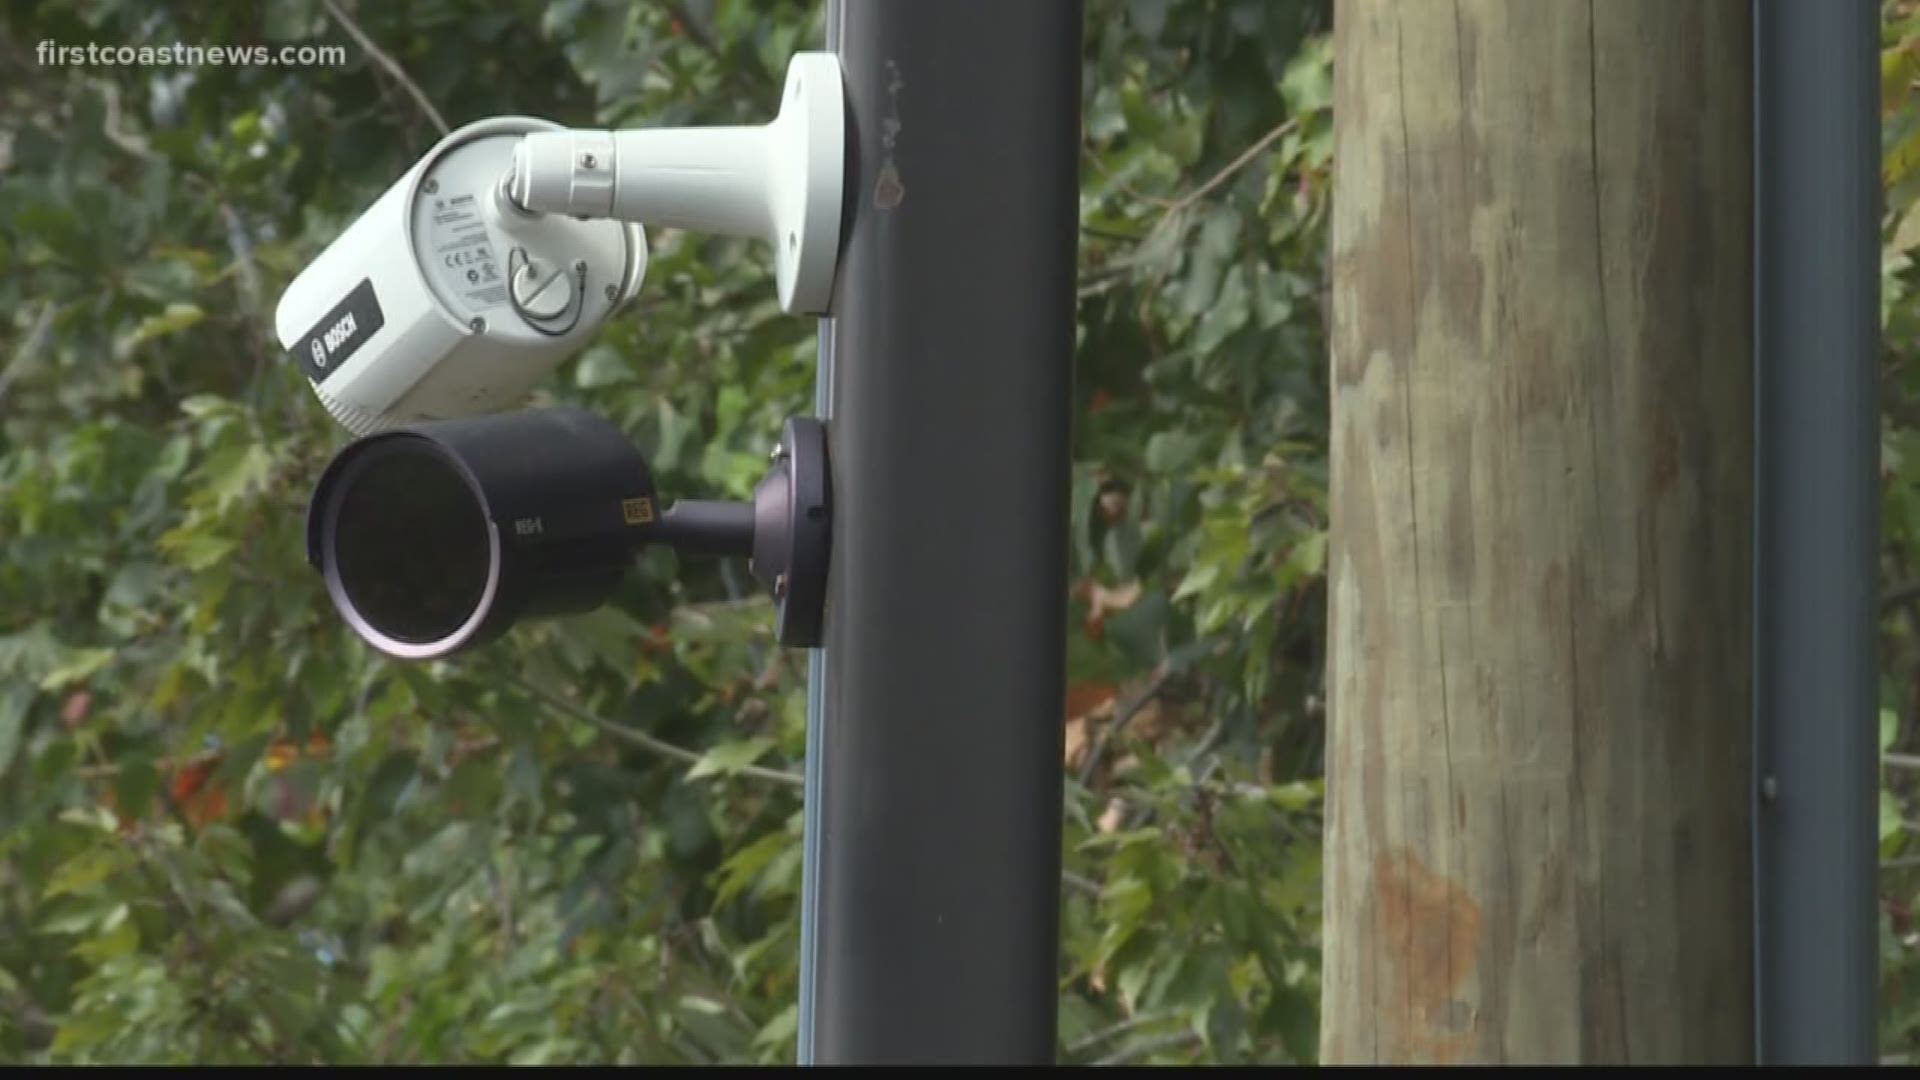 The association added license plate readers two years ago in addition to cameras already in place. The readers capture cars coming in and out of the neighborhood.